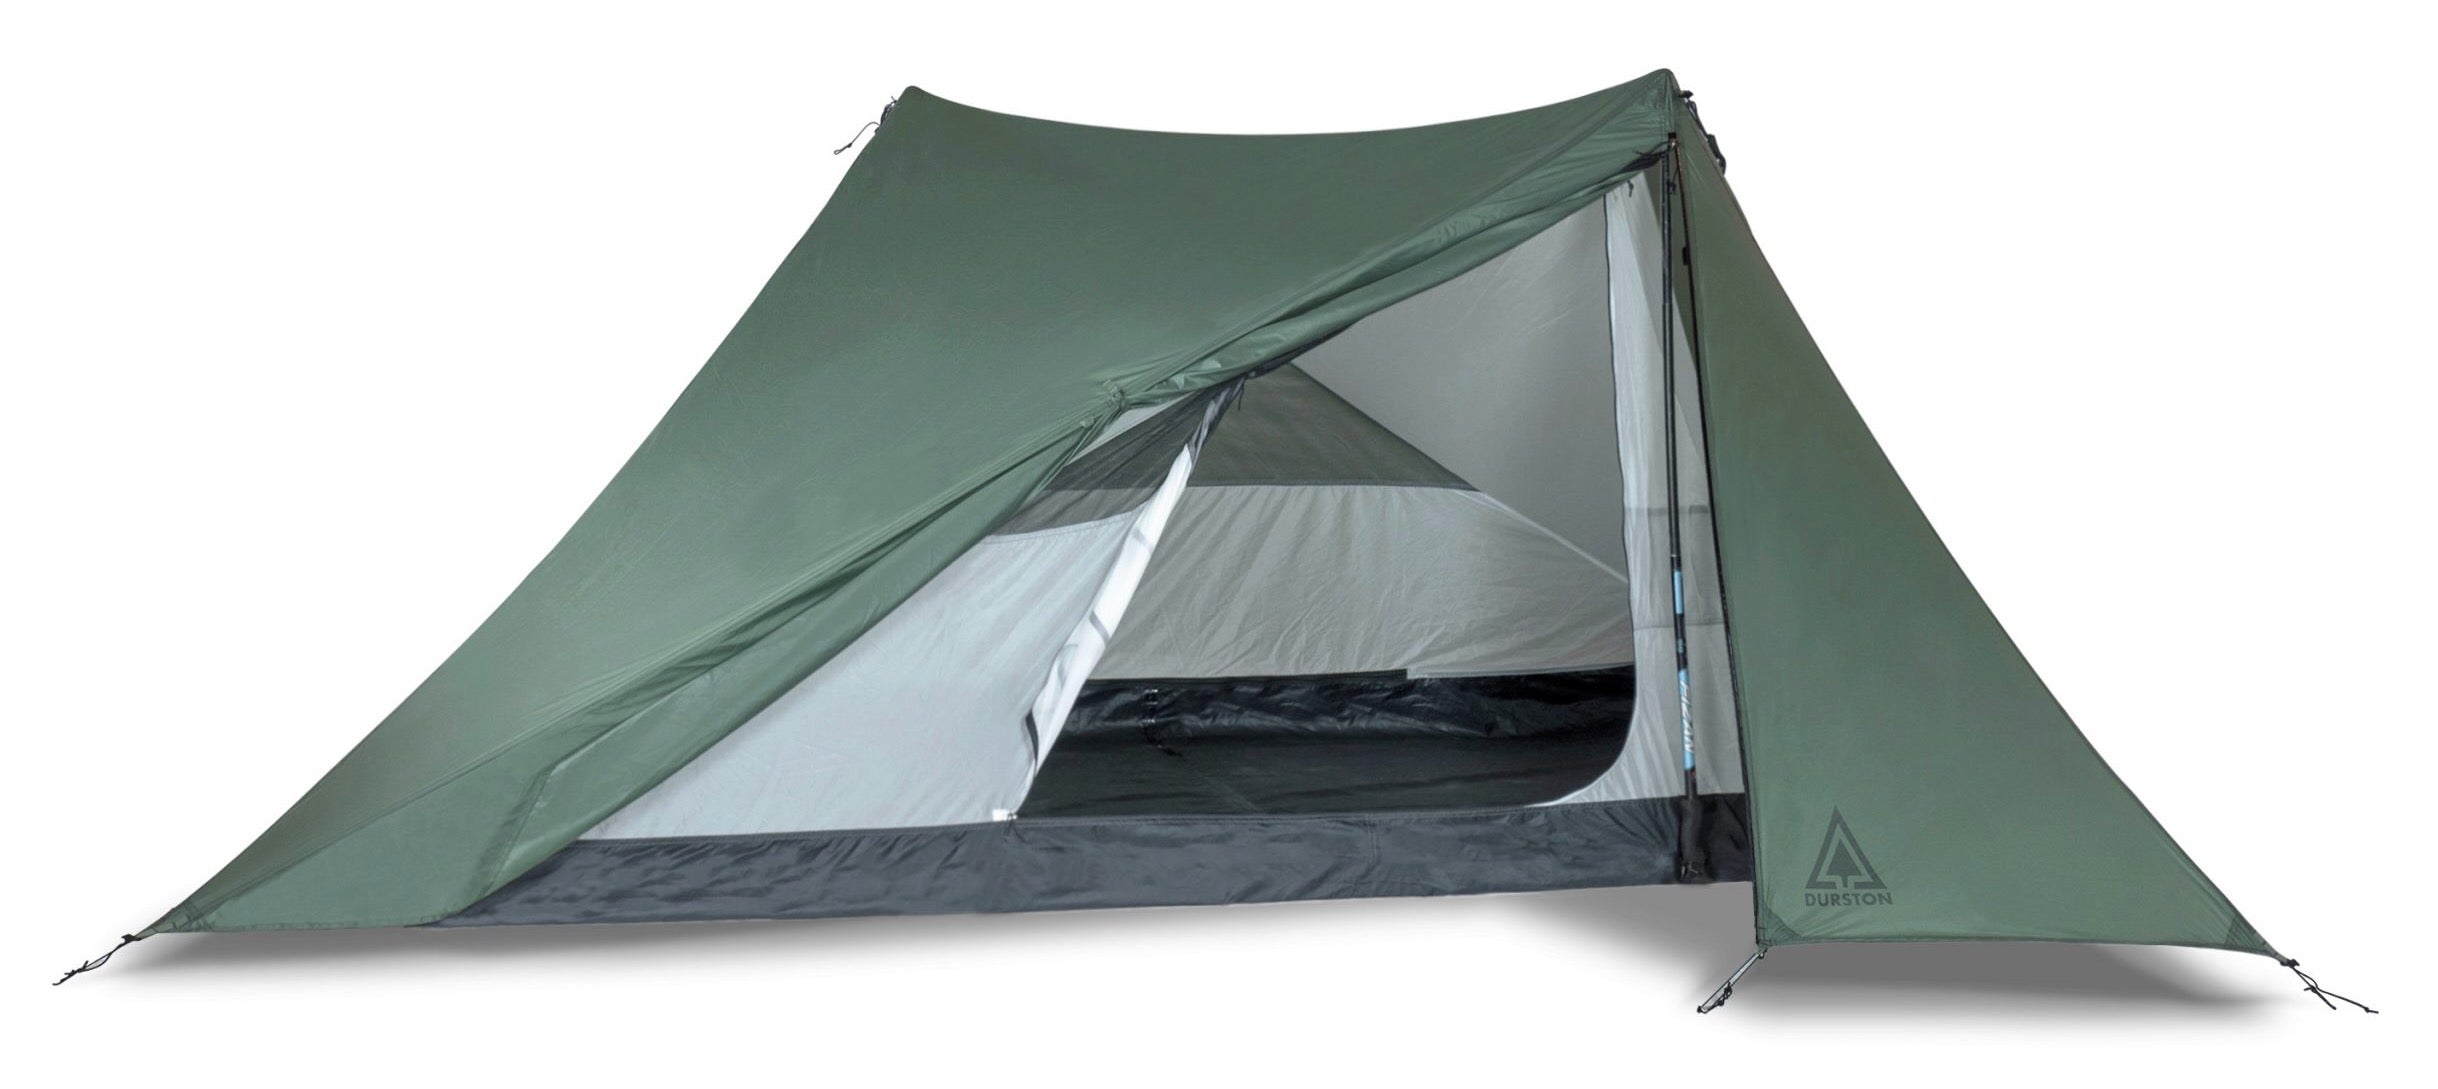 Durston Gear X-Mid 2P Solid UL Tent | nate-hospital.com